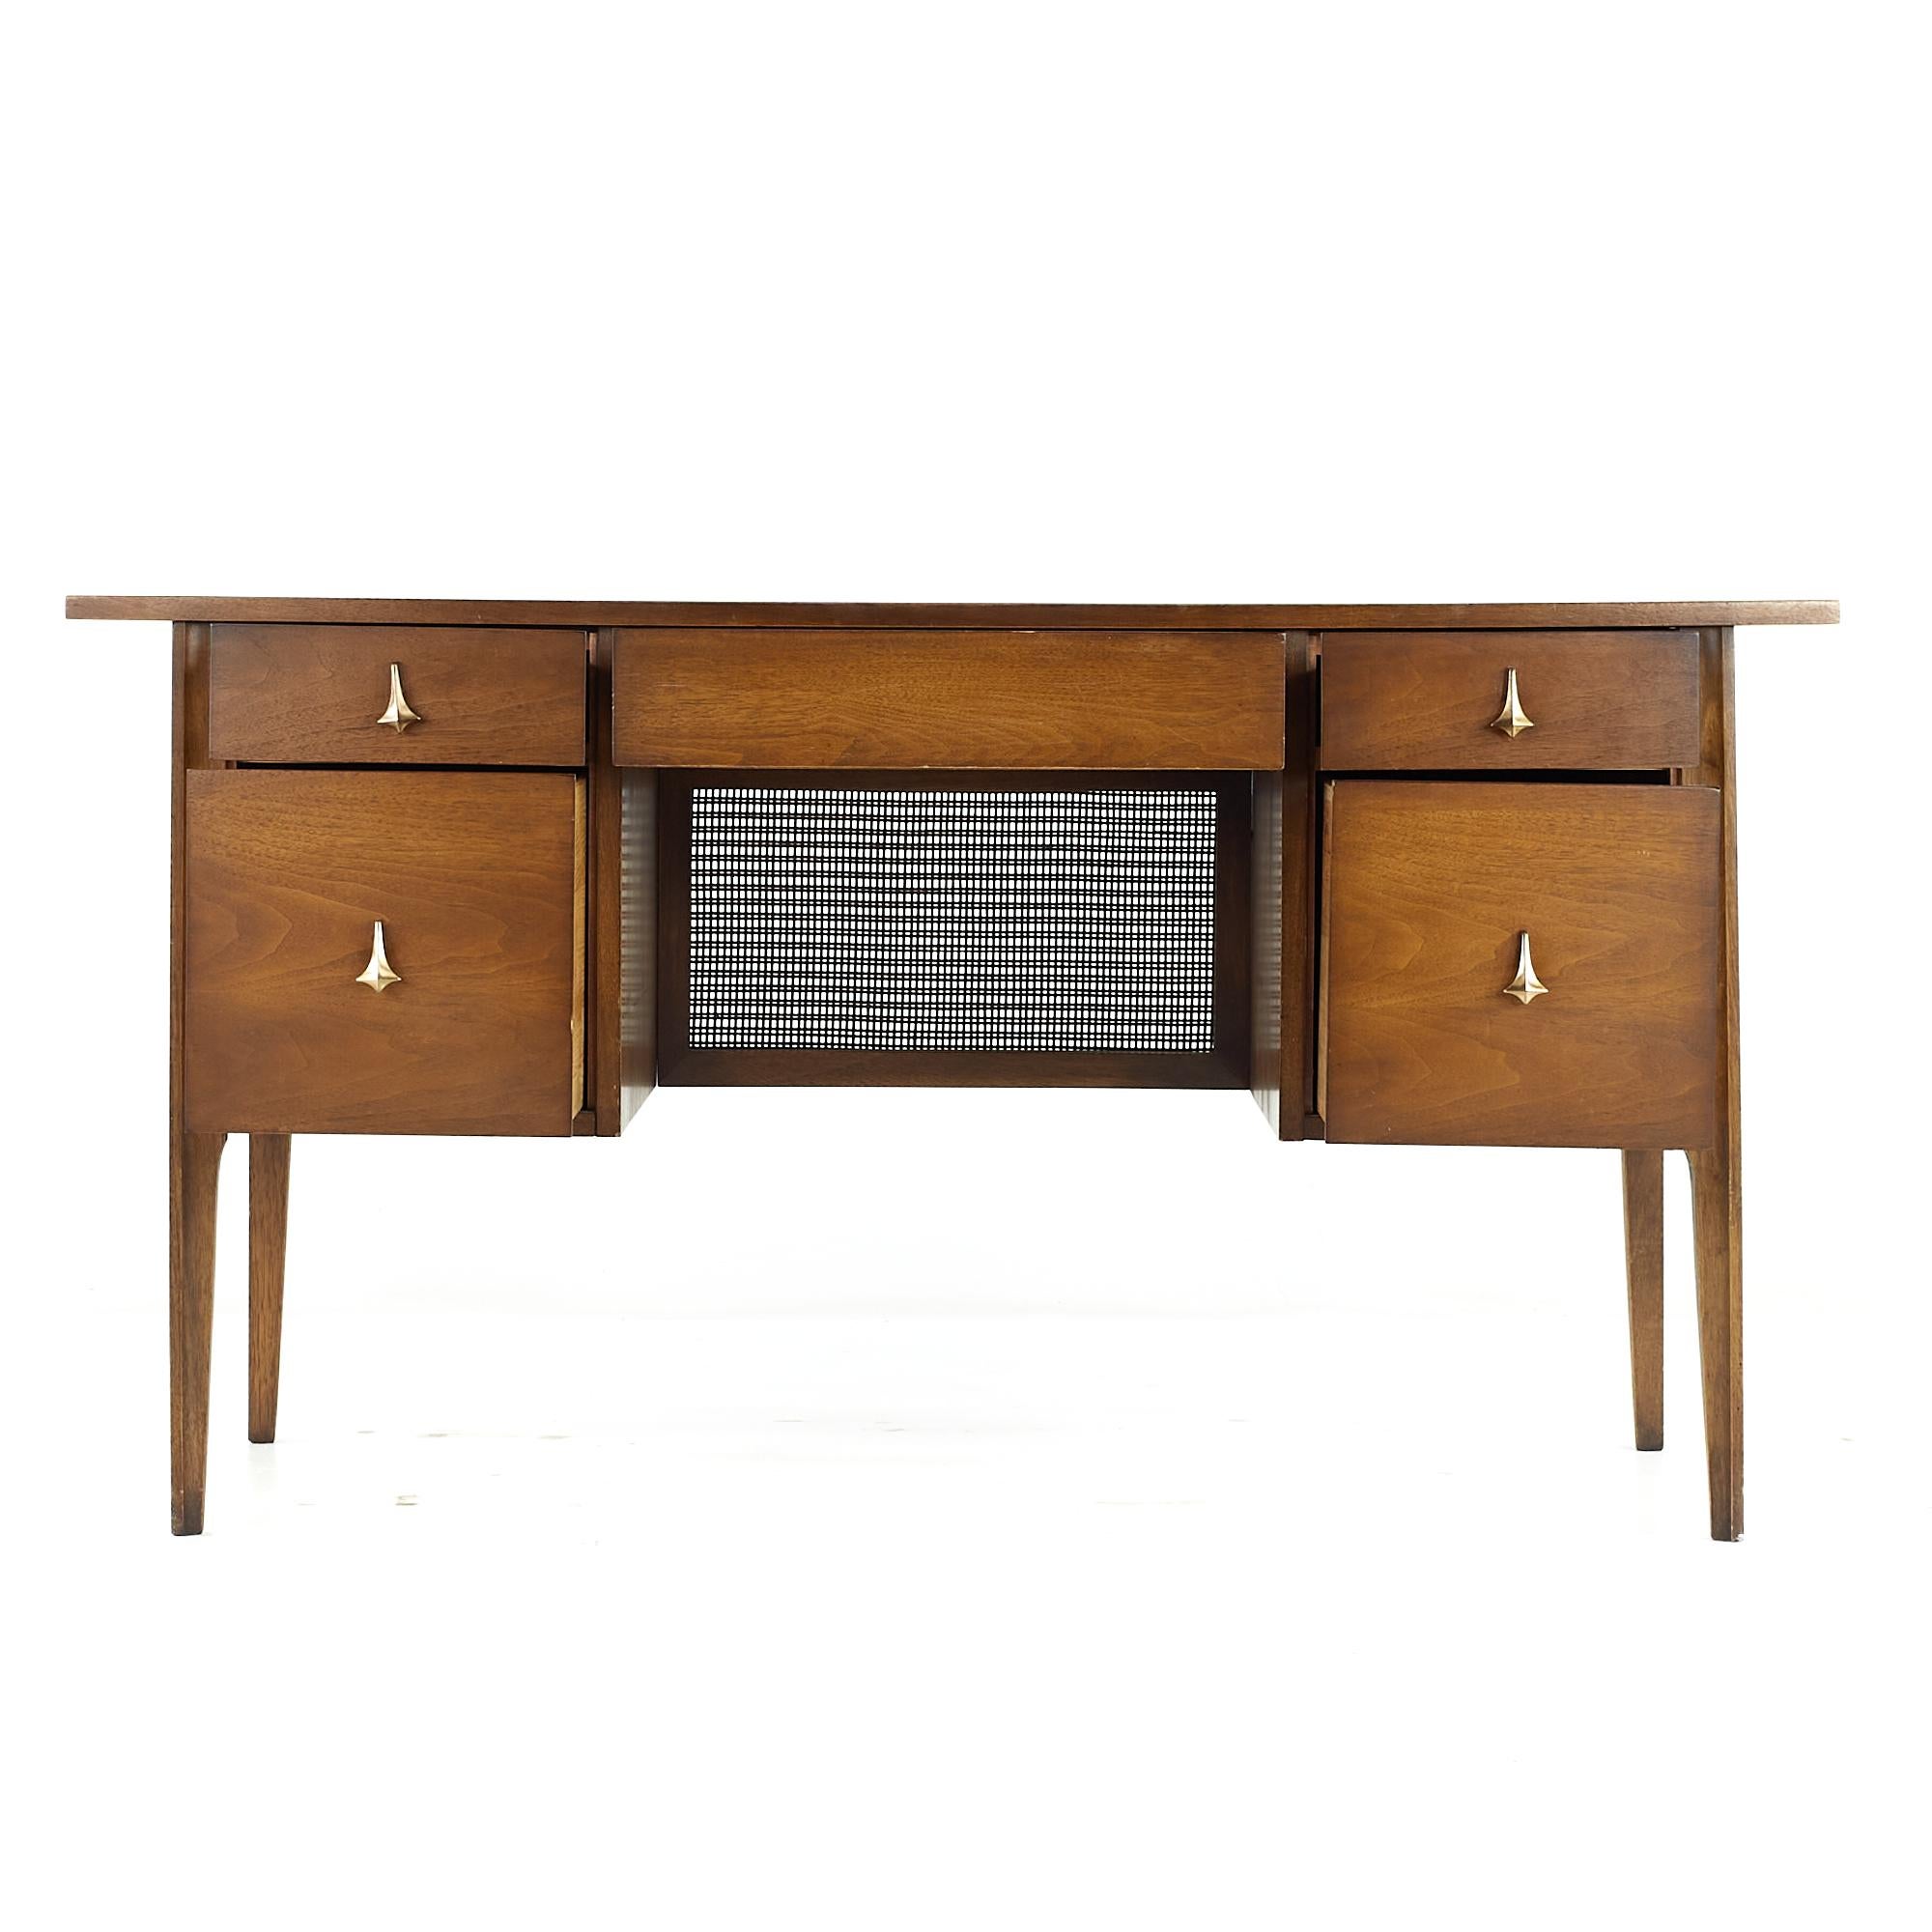 Broyhill Brasilia Midcentury Desk Walnut and Brass Desk In Good Condition For Sale In Countryside, IL